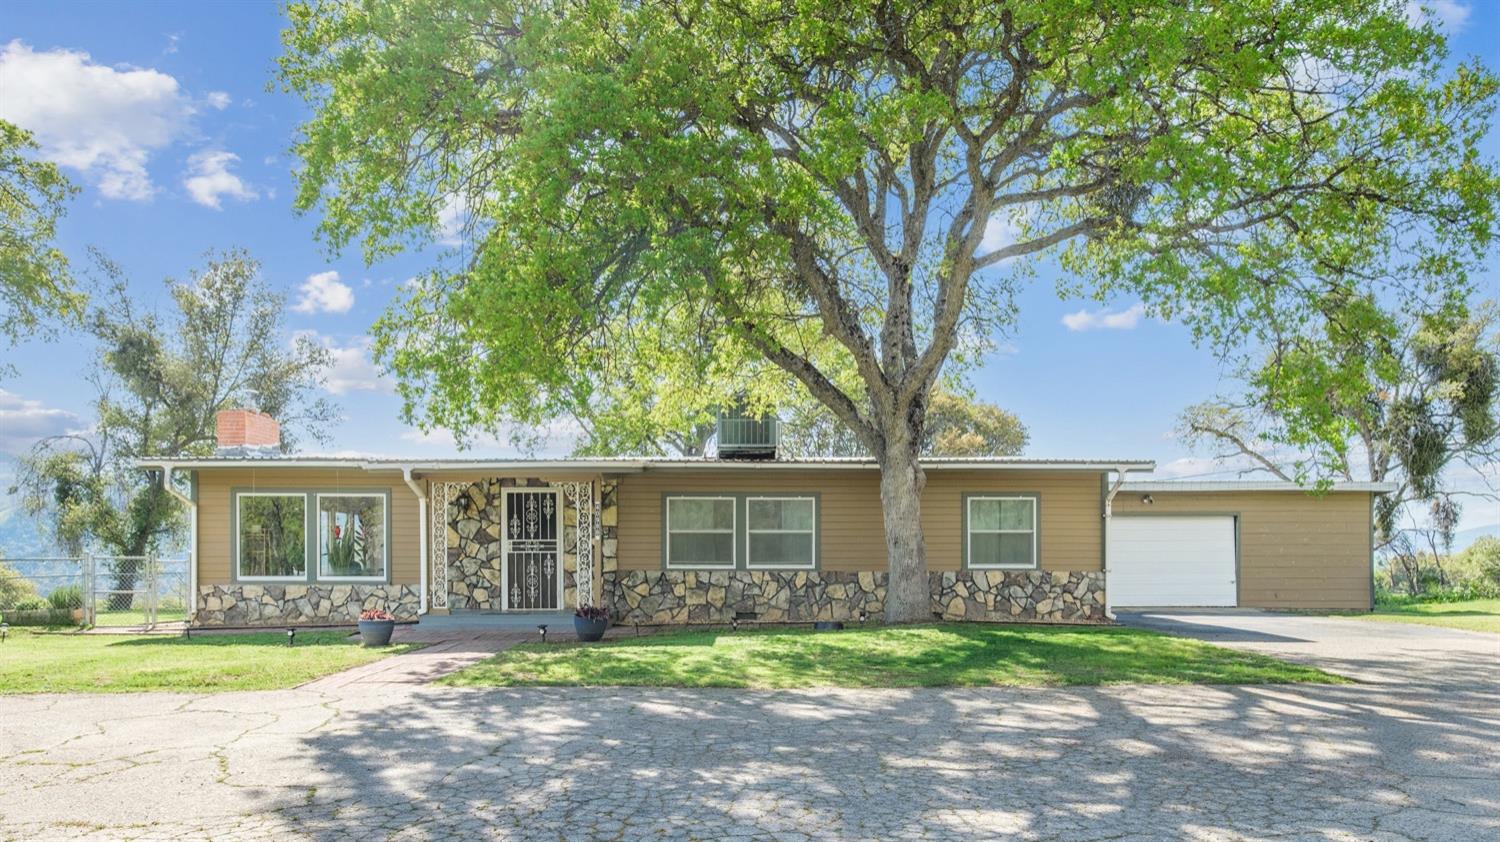 Photo of 40988 Millwood Rd in Dunlap, CA